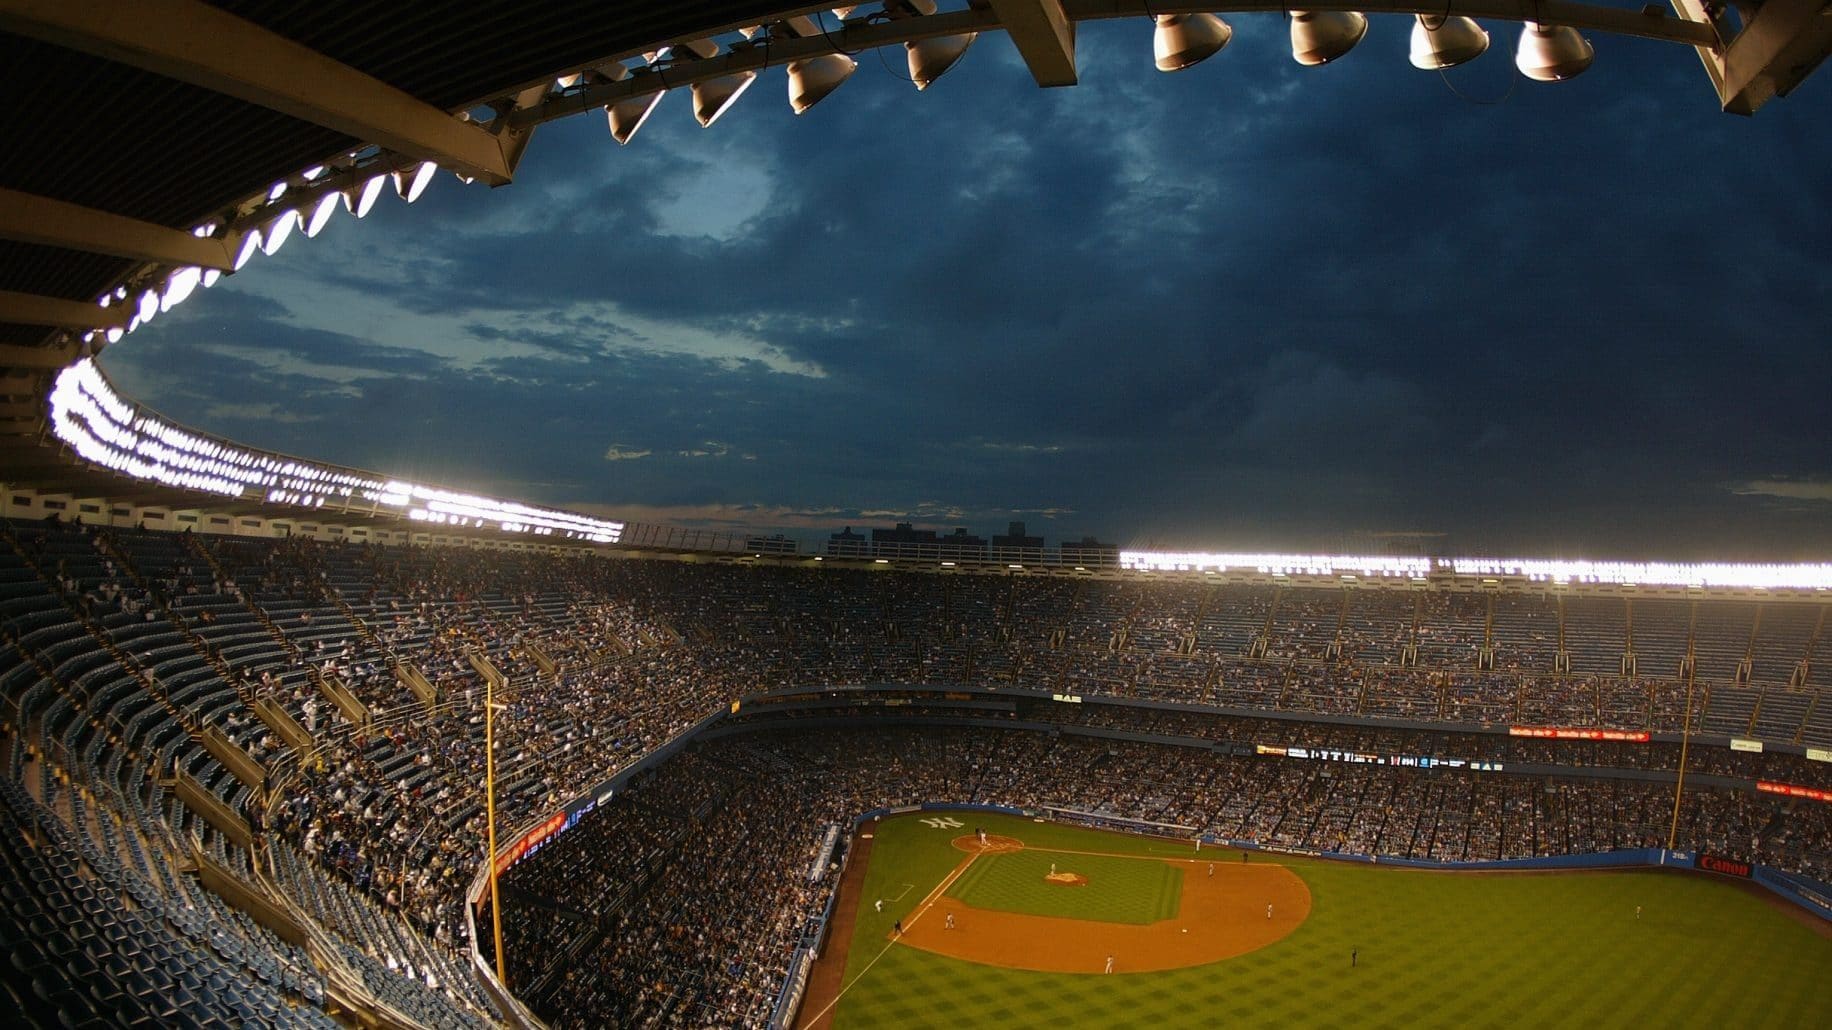 Yankees Stadium - The Cathedral of Baseball